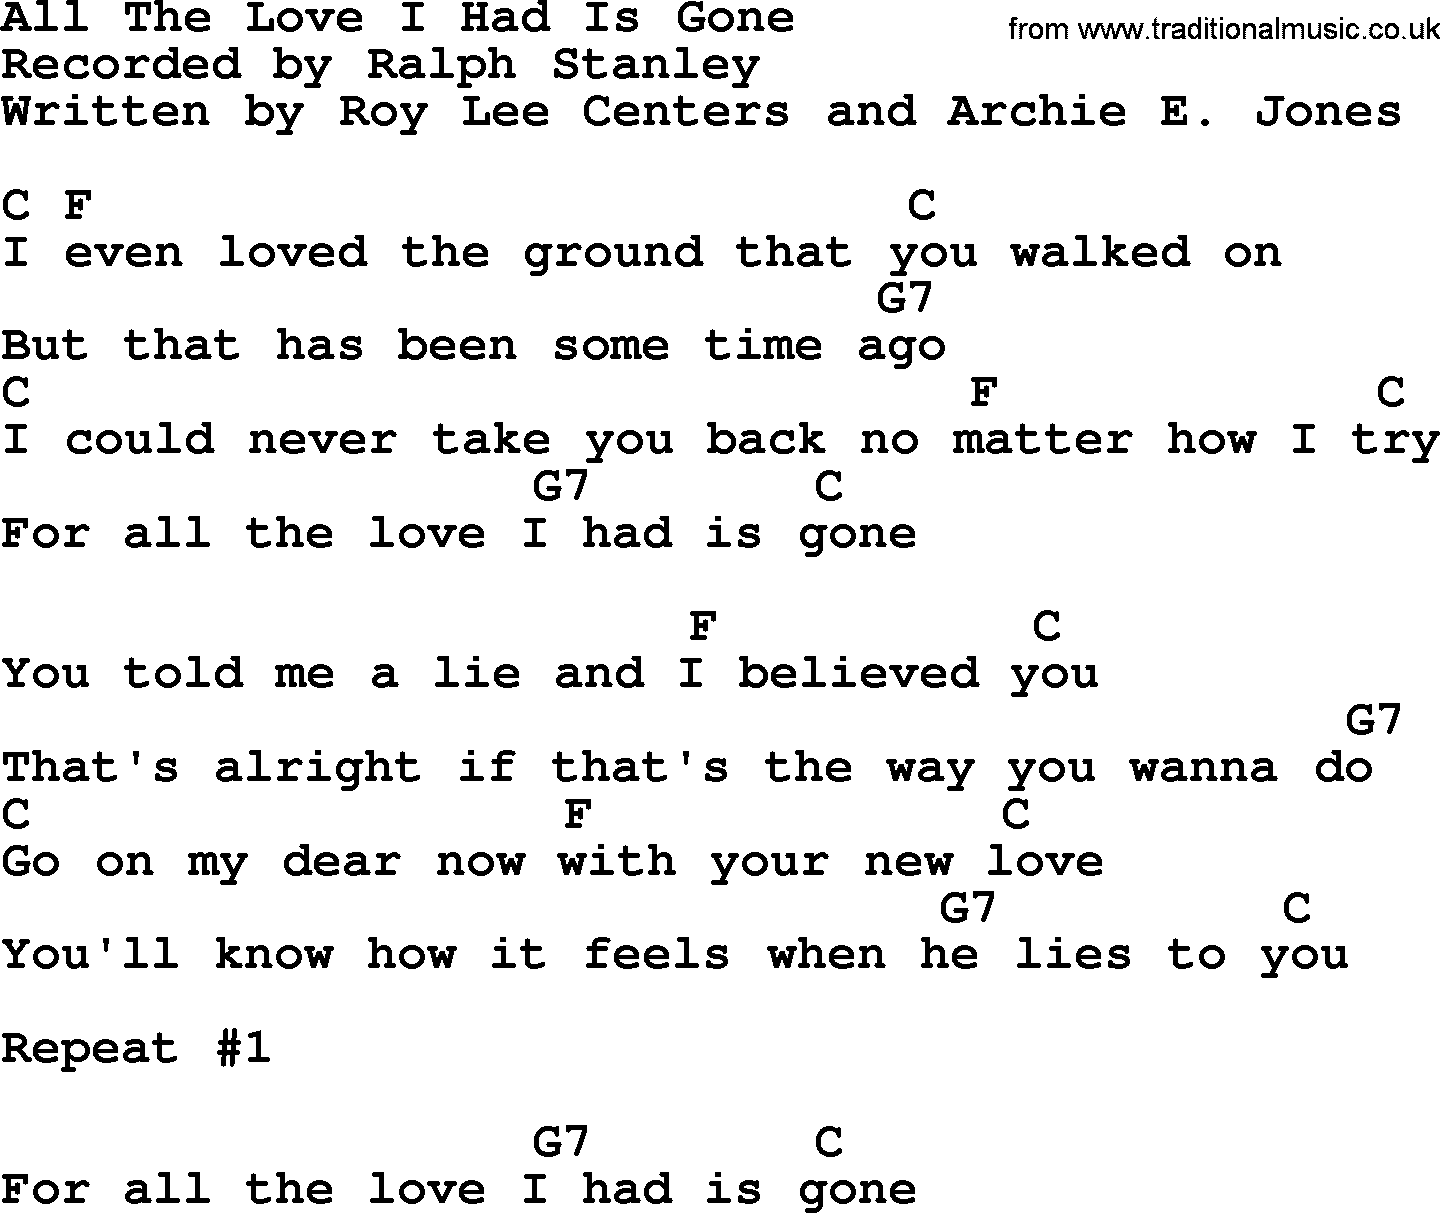 All The Love I Had Is Gone Bluegrass Lyrics With Chords Guitabs and love her guitar chords lyrics. traditional music library